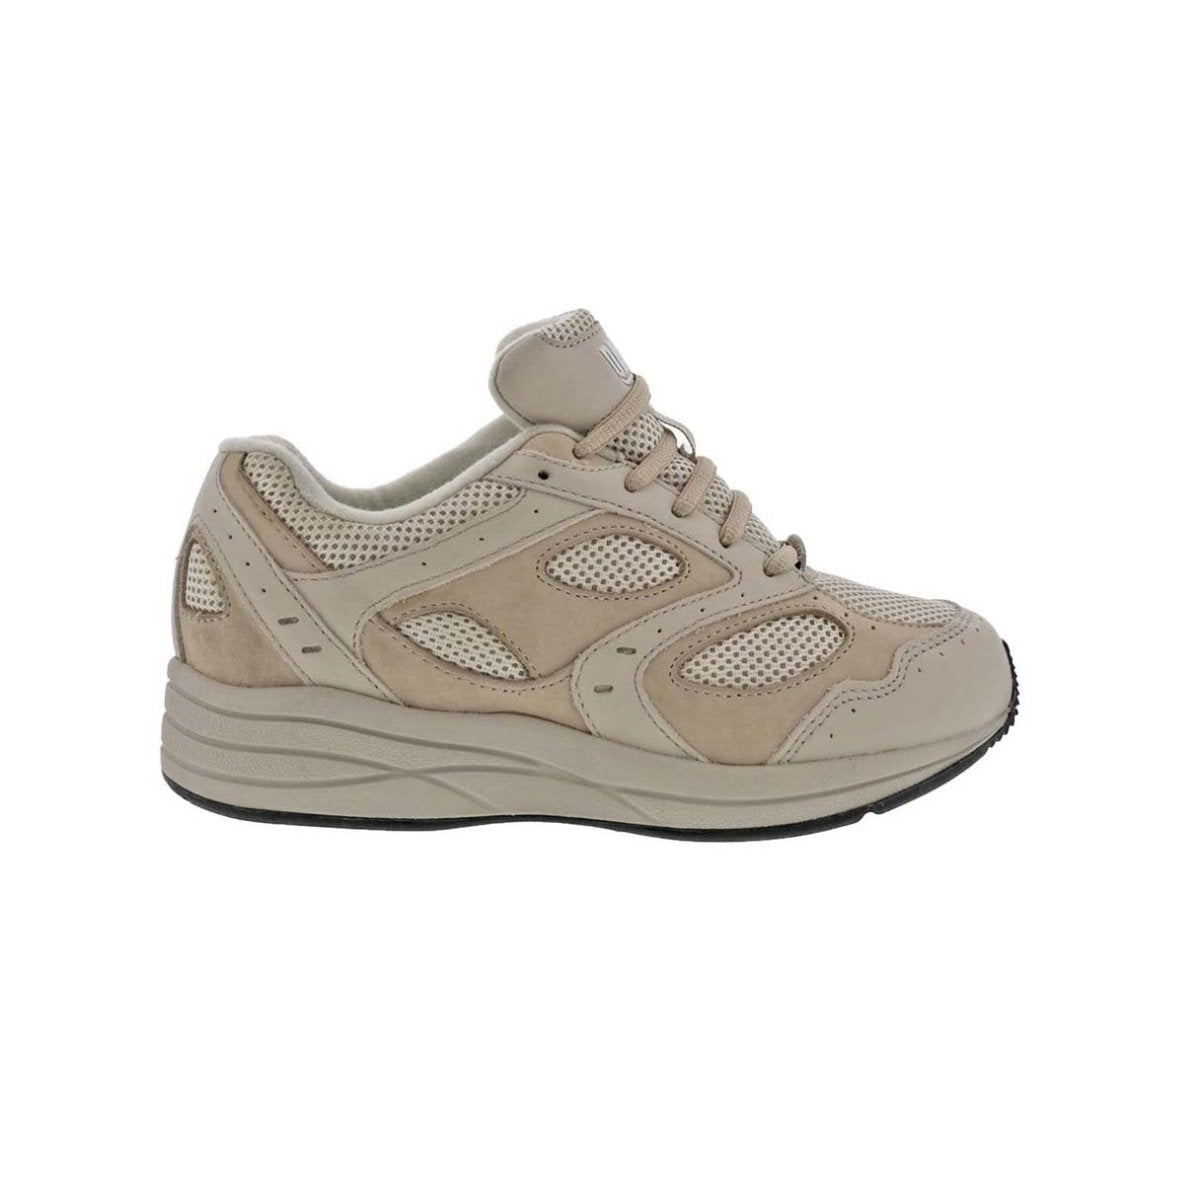 DREW FLARE WOMEN ATHLETIC SHOES IN BONE COMBO - TLW Shoes